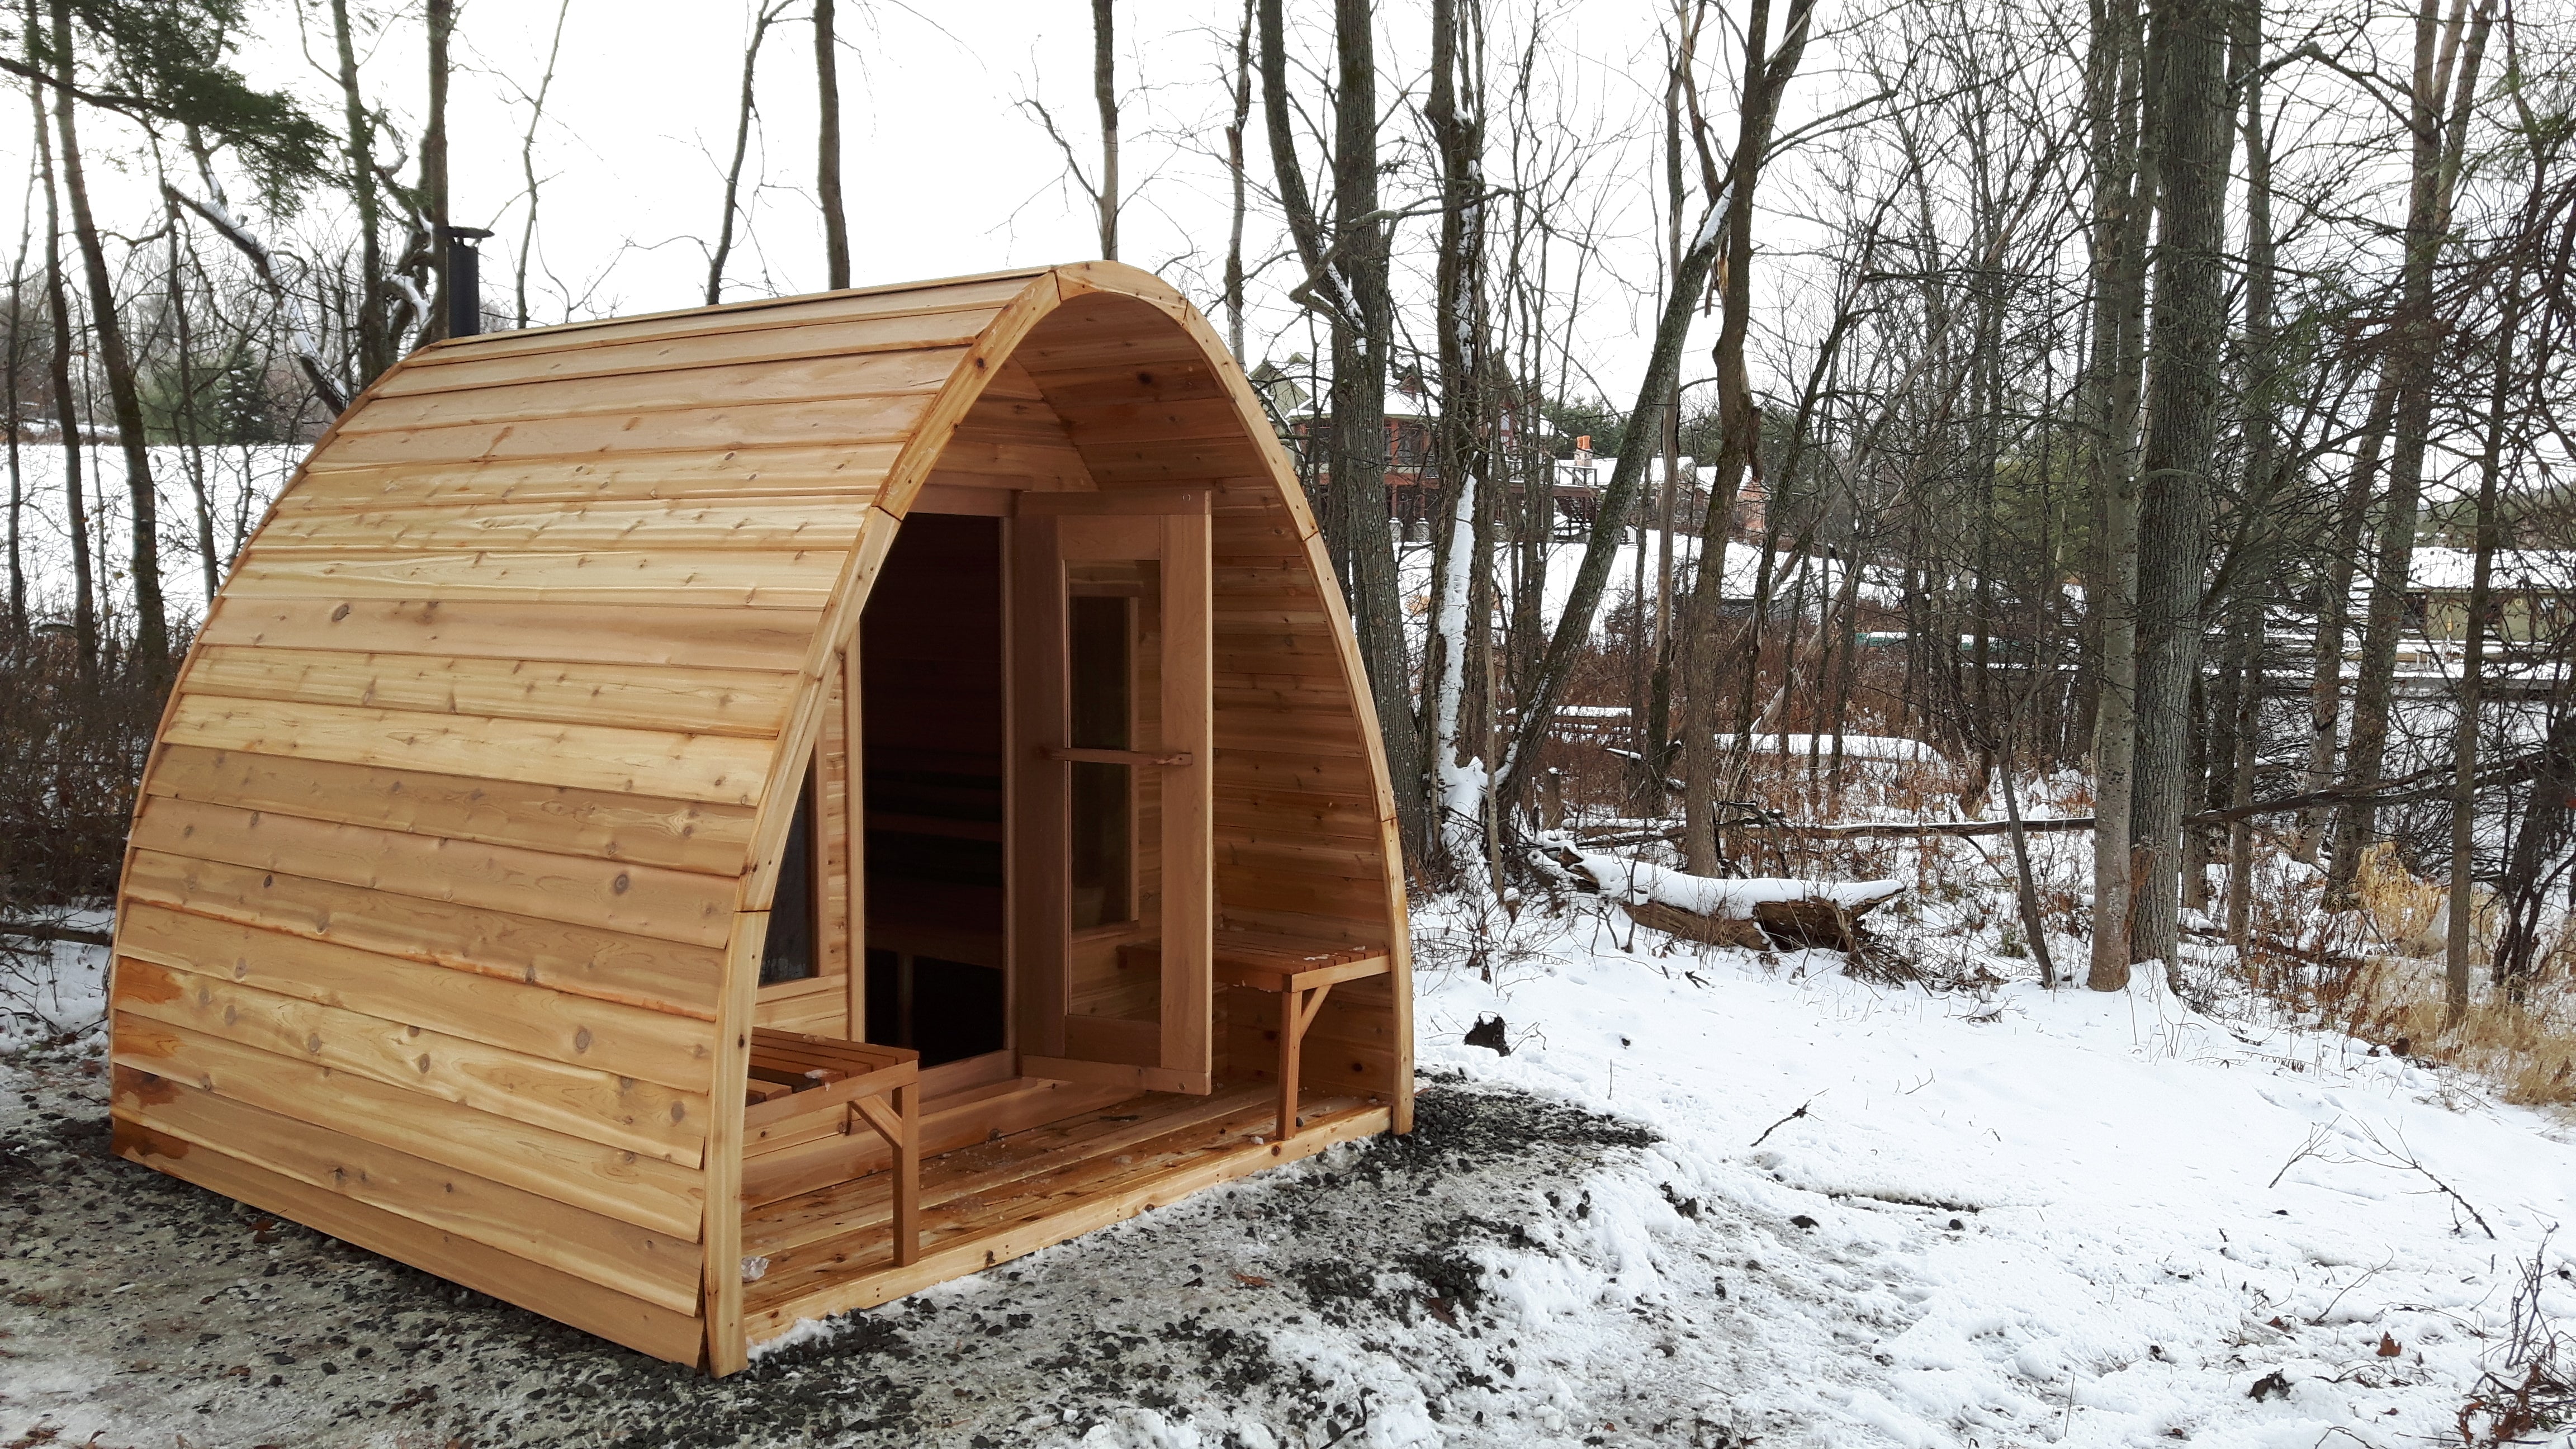 Knotty Pod Sauna with porch and windows at the chalet